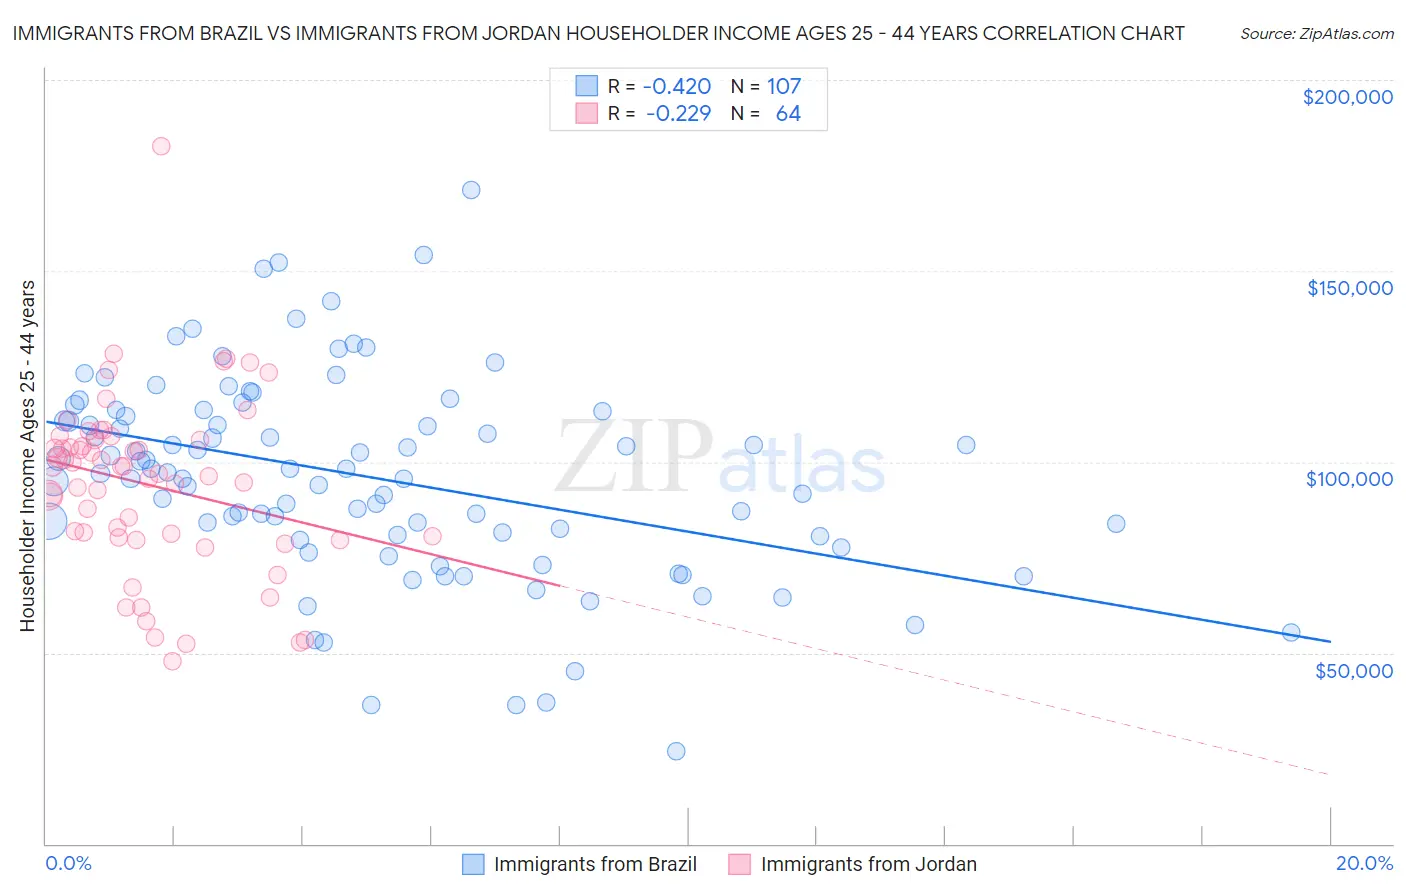 Immigrants from Brazil vs Immigrants from Jordan Householder Income Ages 25 - 44 years